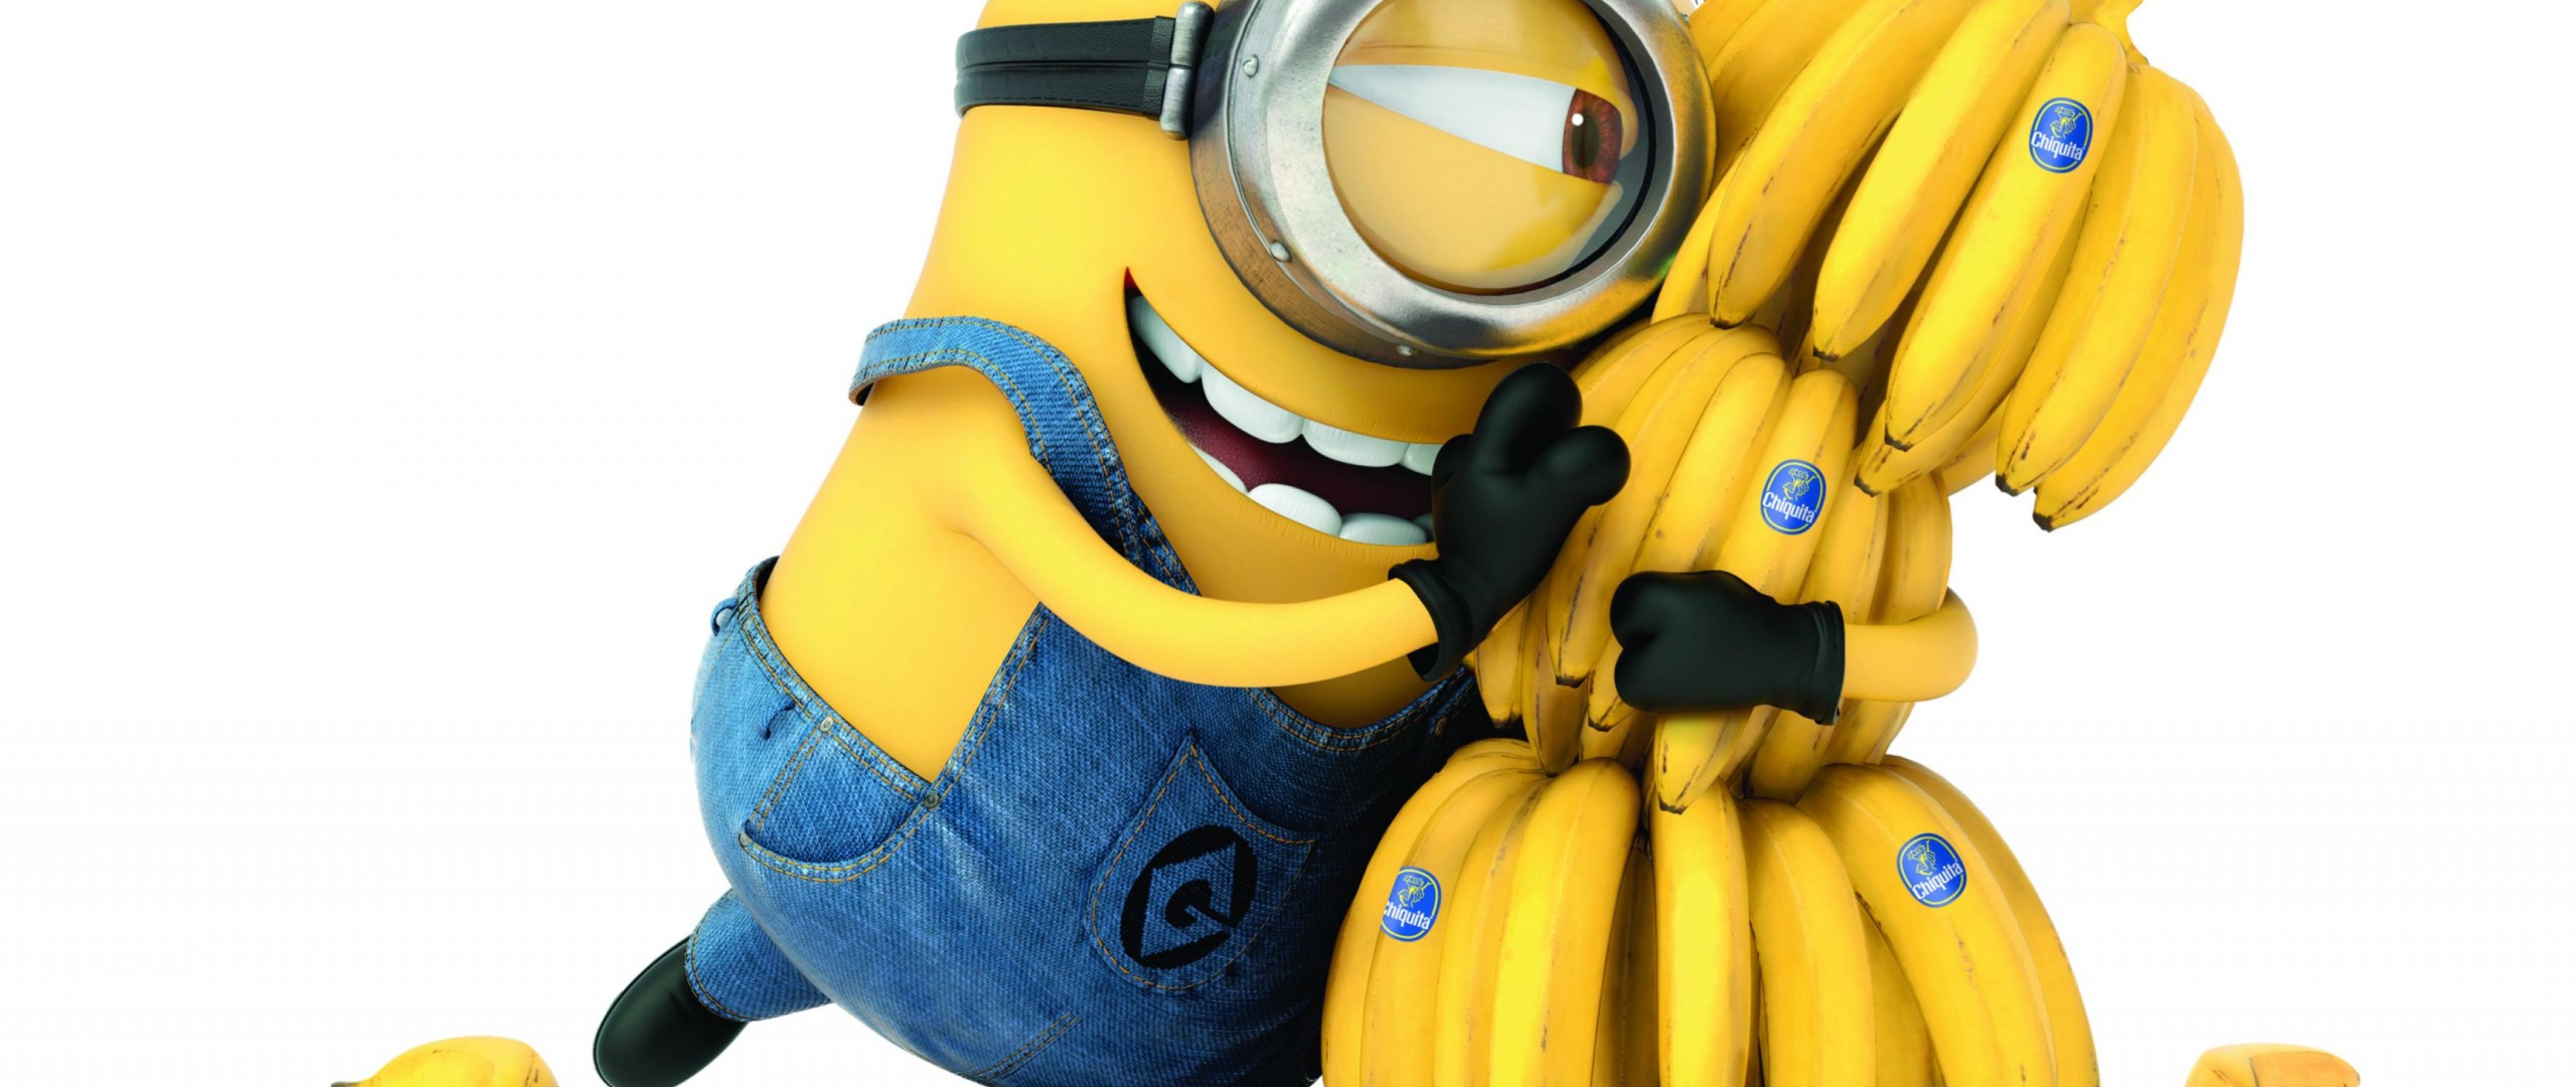 Minion Holding A Bunch of Bananas Wallpaper for Desktop and Mobiles 4K  Ultra HD Wide TV - HD Wallpaper 